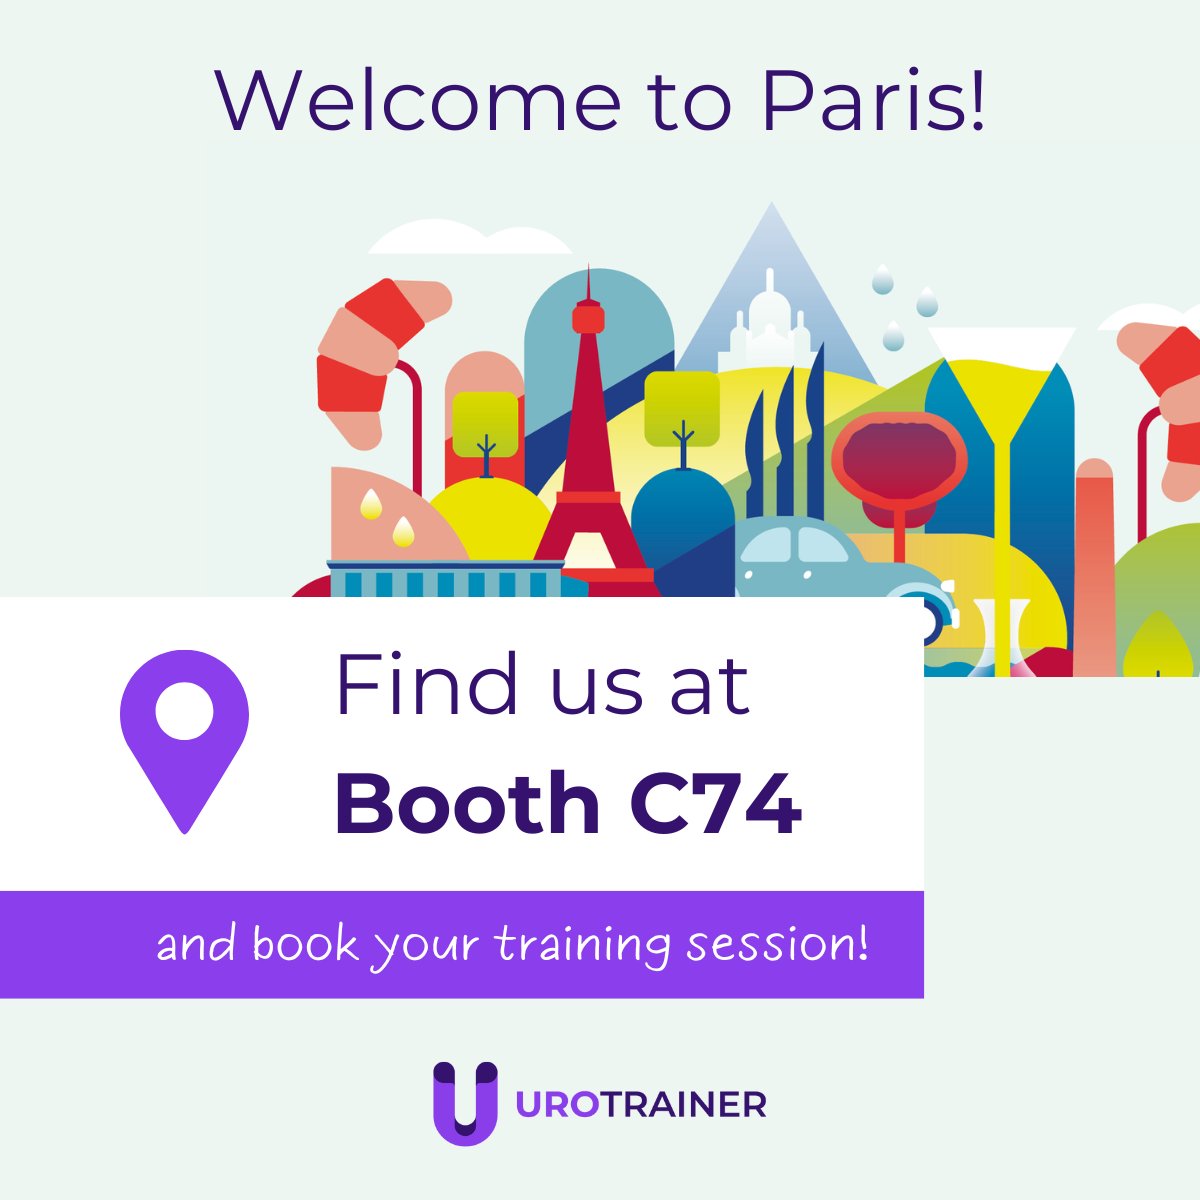 WELCOME TO PARIS! 🥐 We are ready 💪🏼 Join us at #EAU24, Booth C74, and challenge your surgical skills for free with our 3D simulators #ProstateCancer #Urology #UroSoMe #Bladder #Kidney #RARP #RAPN